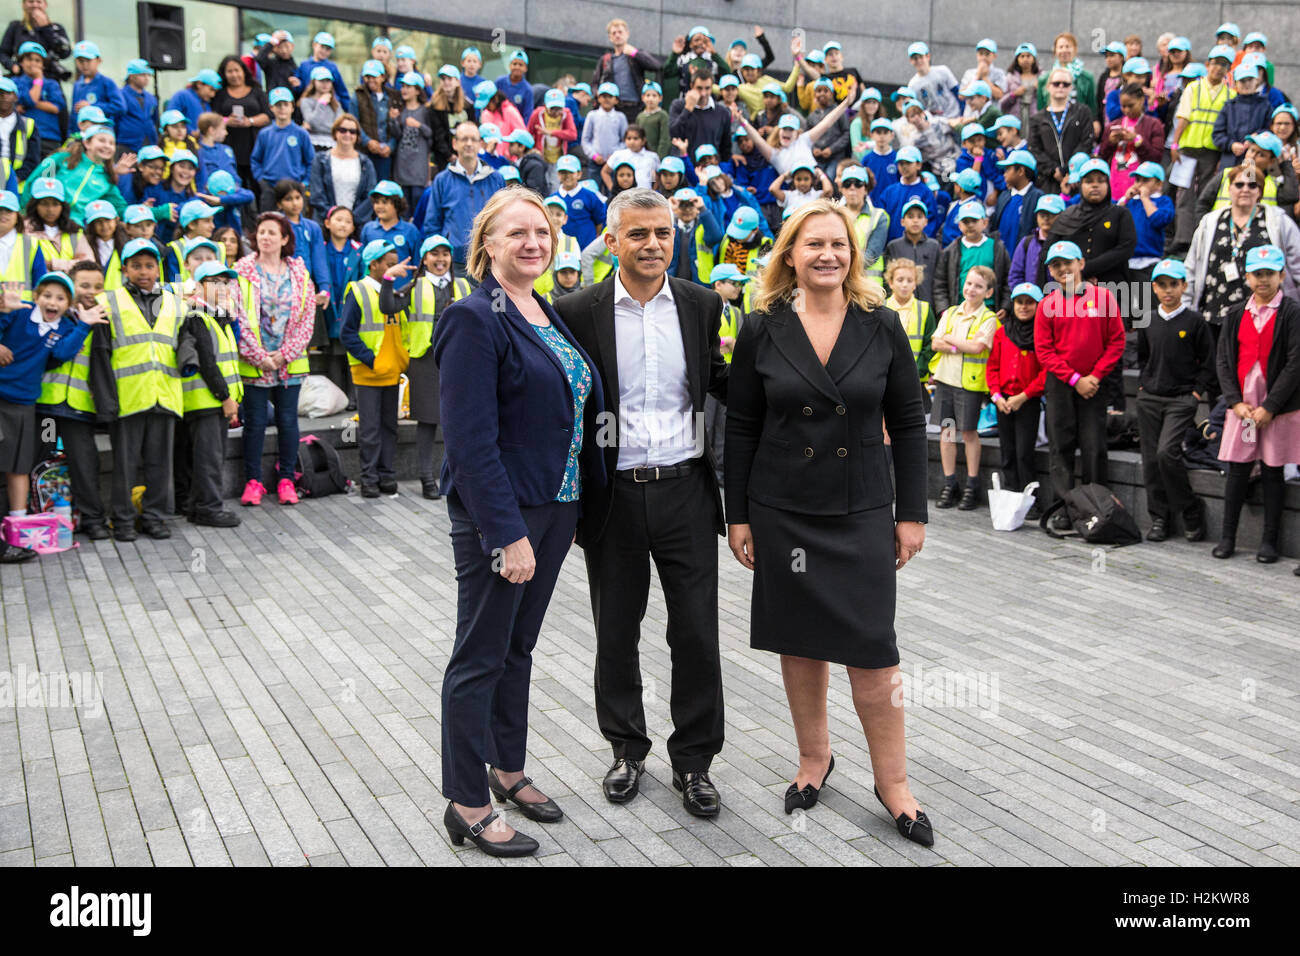 London, UK. 29th September, 2016. The Mayor of London, Sadiq Khan, launches the new London Curriculum for primary schools at the London Curriculum Festival at the Scoop, accompanied by Joanne McCartney, Deputy Mayor for Education, and Yelena Baturina, founder of the Be Open Foundation. Credit:  Mark Kerrison/Alamy Live News Stock Photo